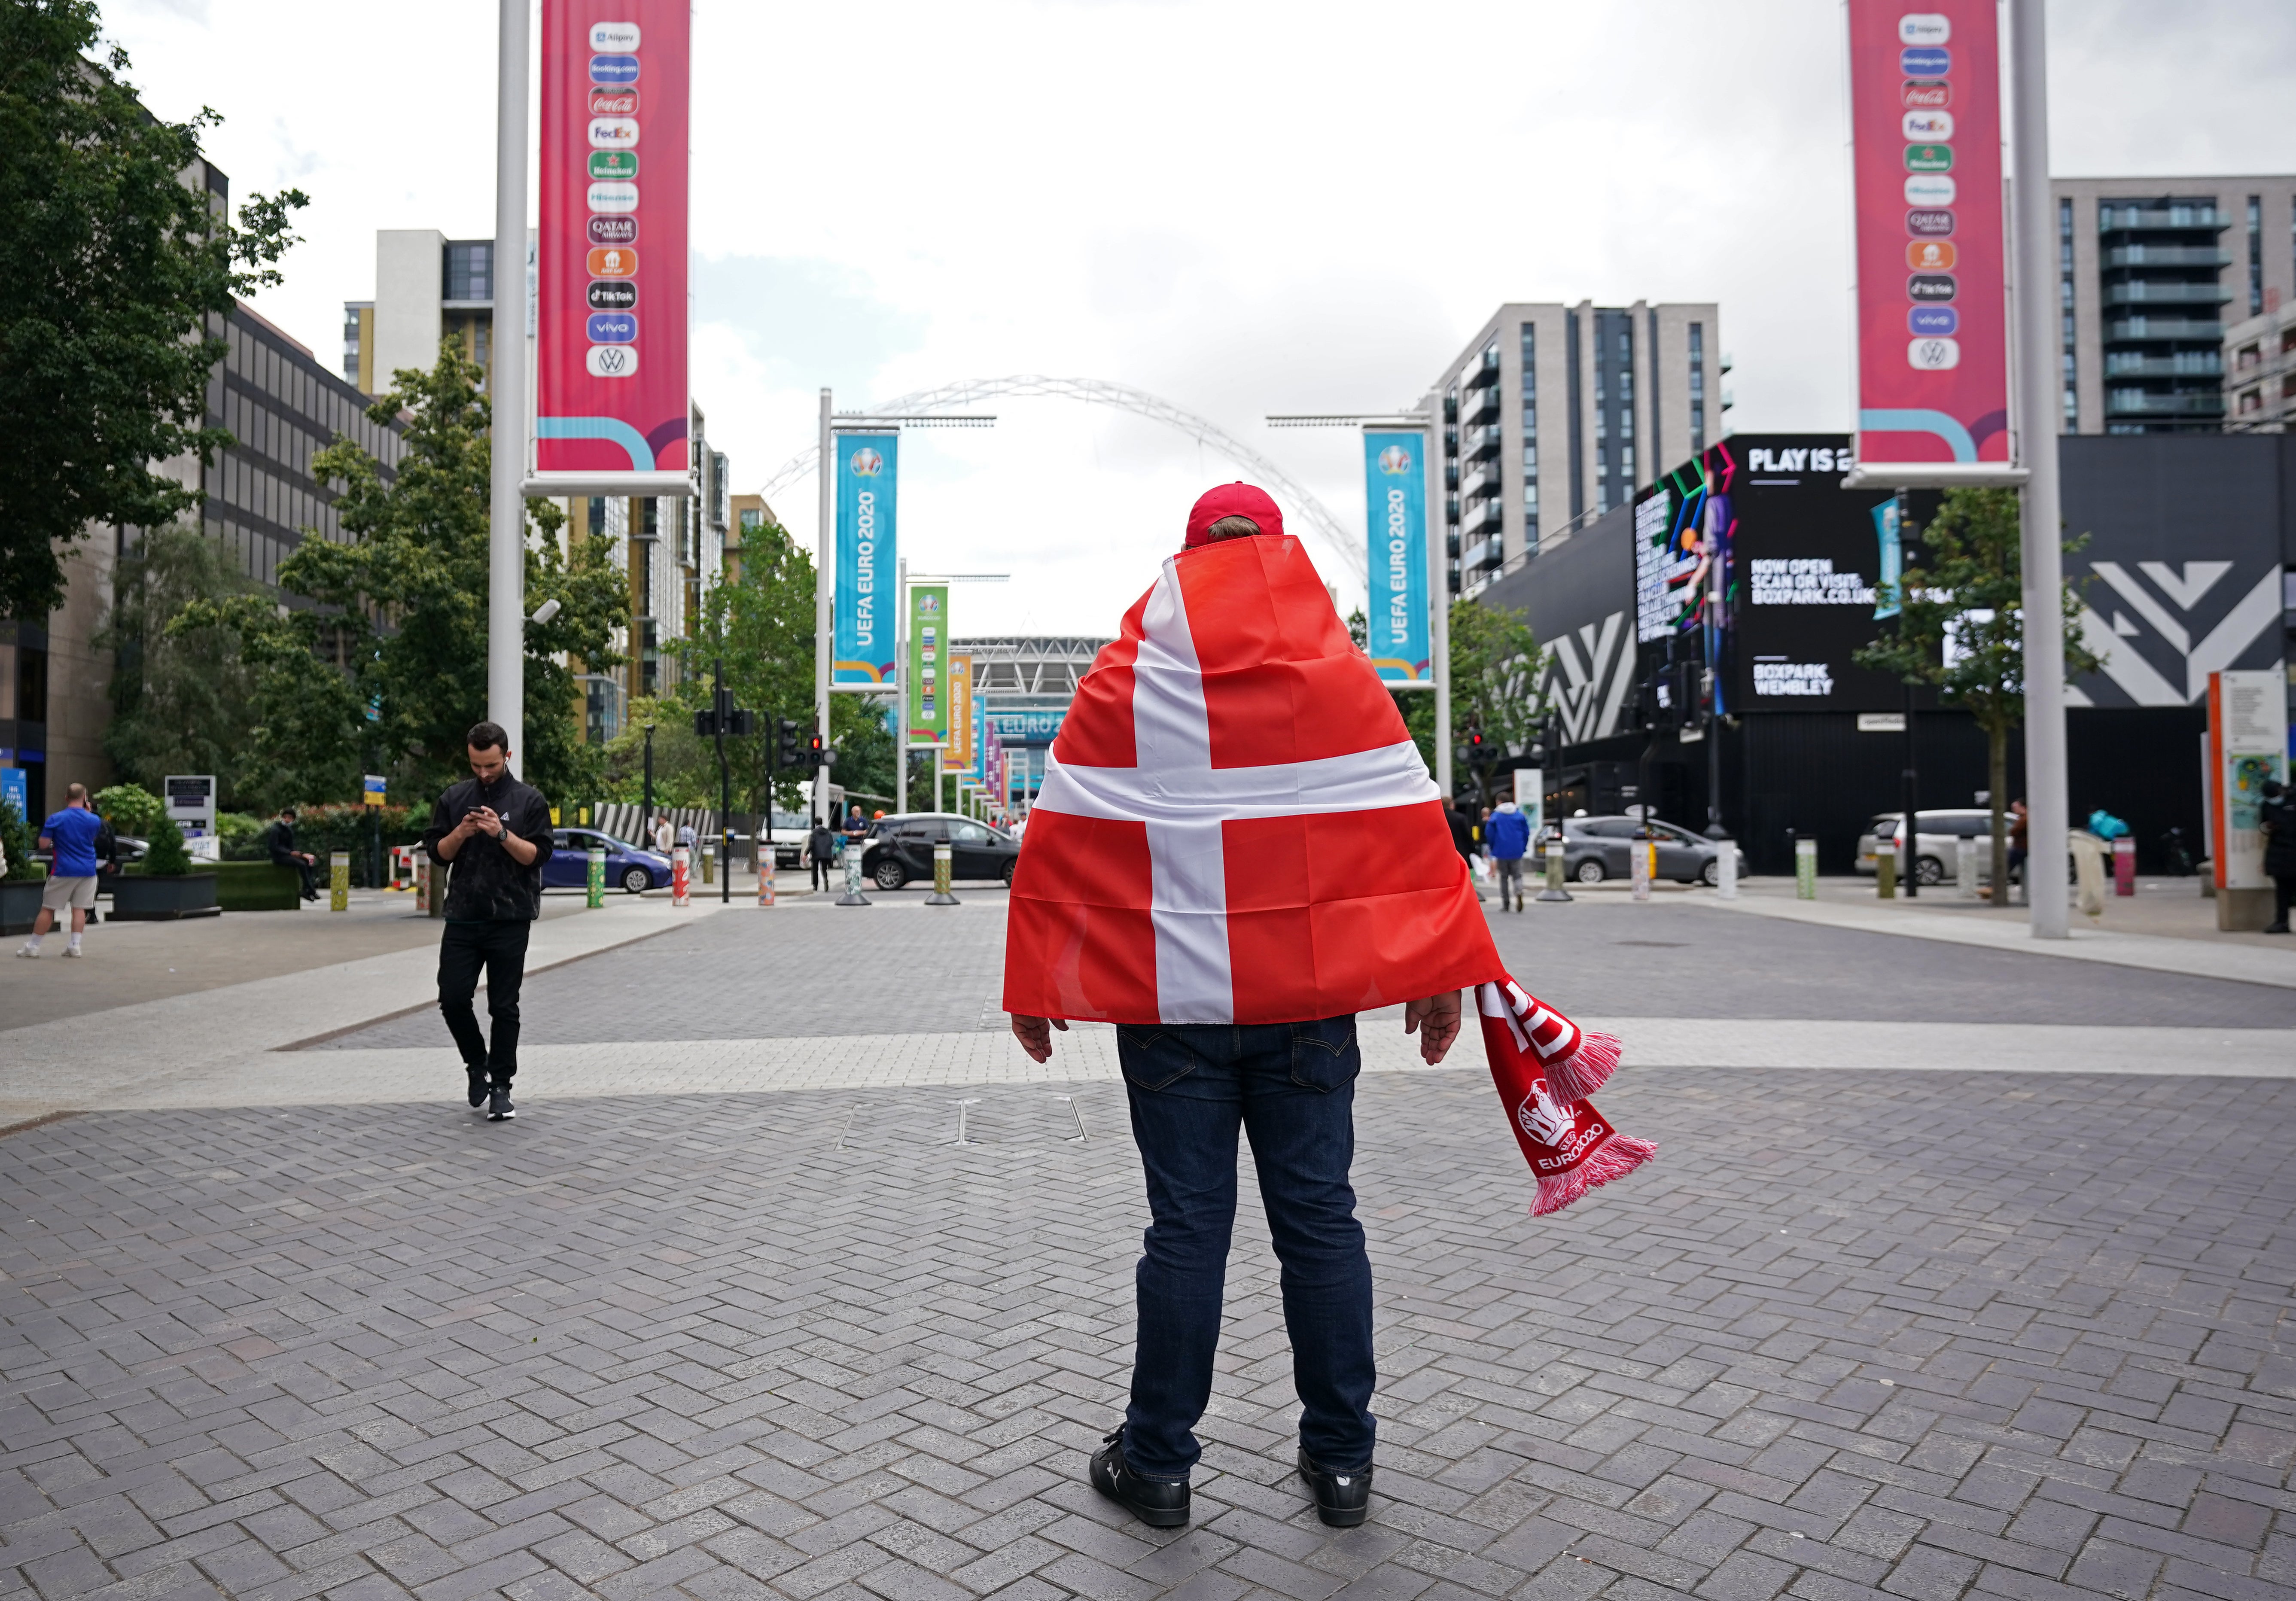 A Denmark fan surveys the scene before the semi-final match started at Wembley